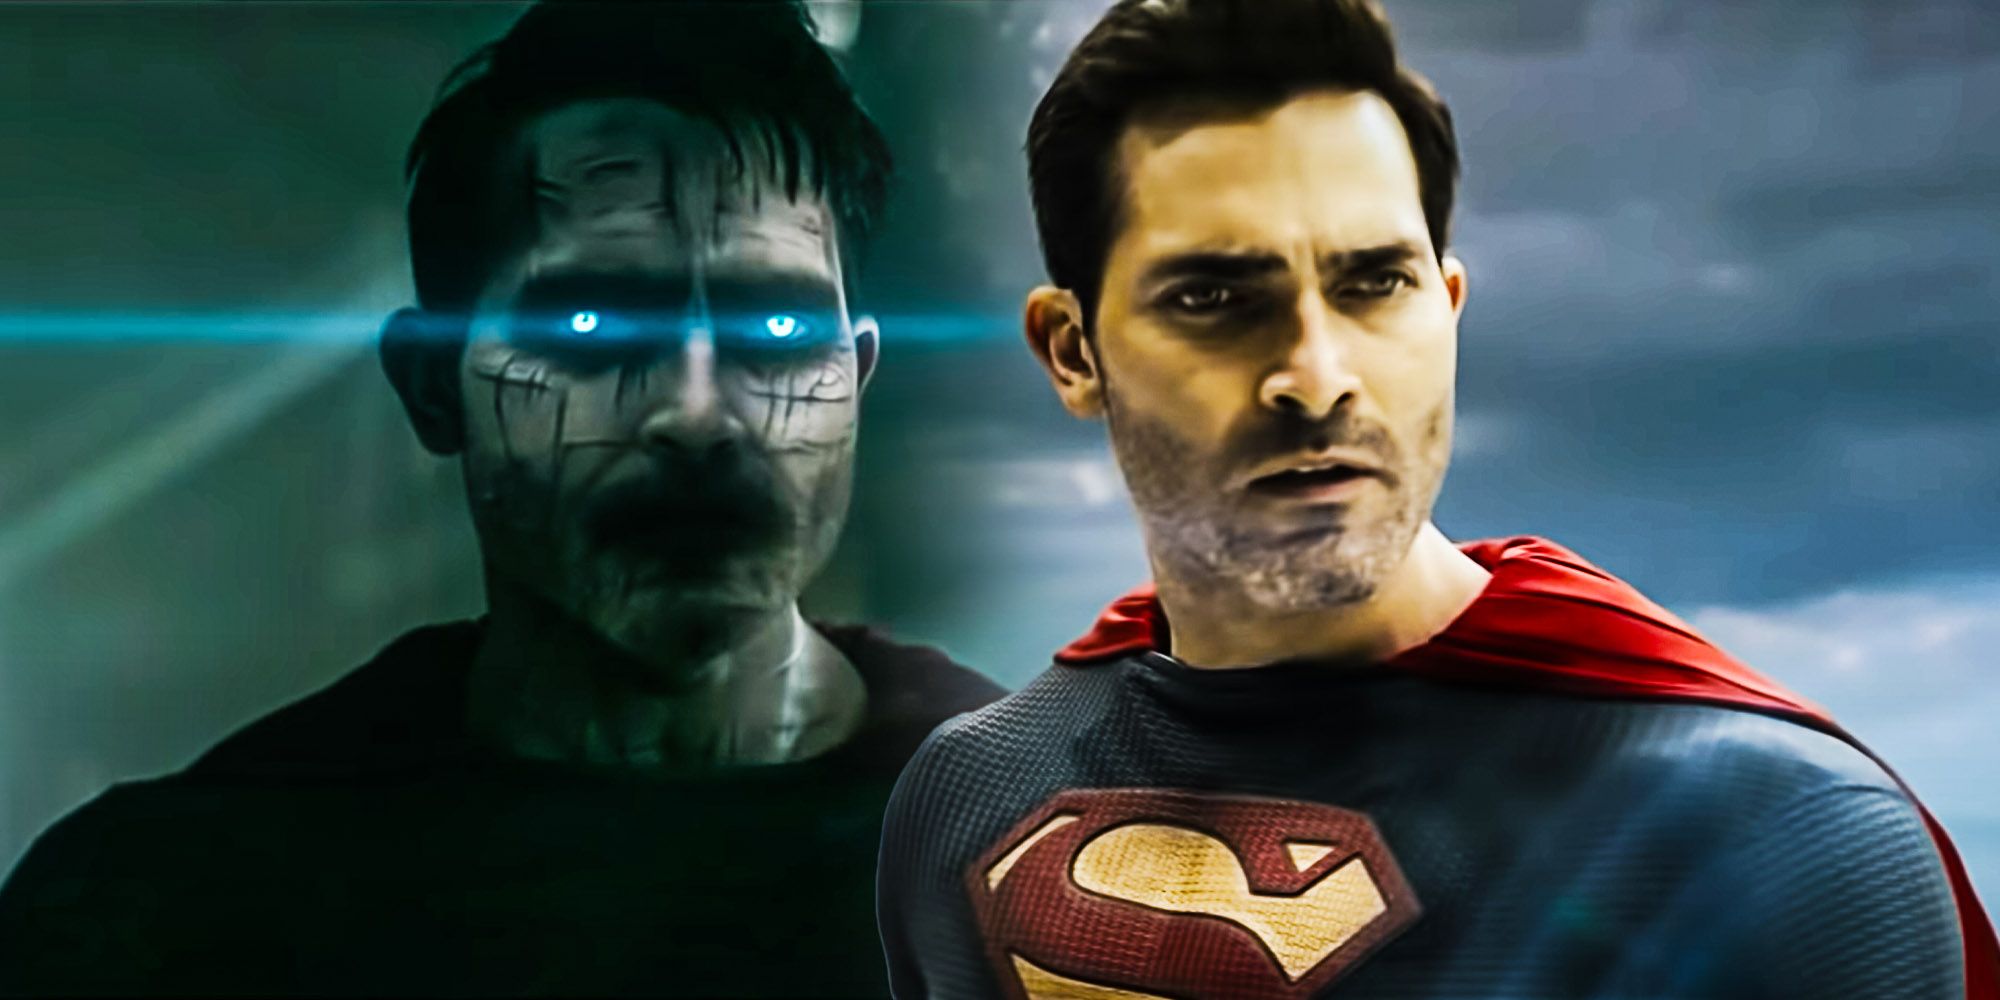 superman and lois season 2 made it difficult for Birzarro to be supermans villain